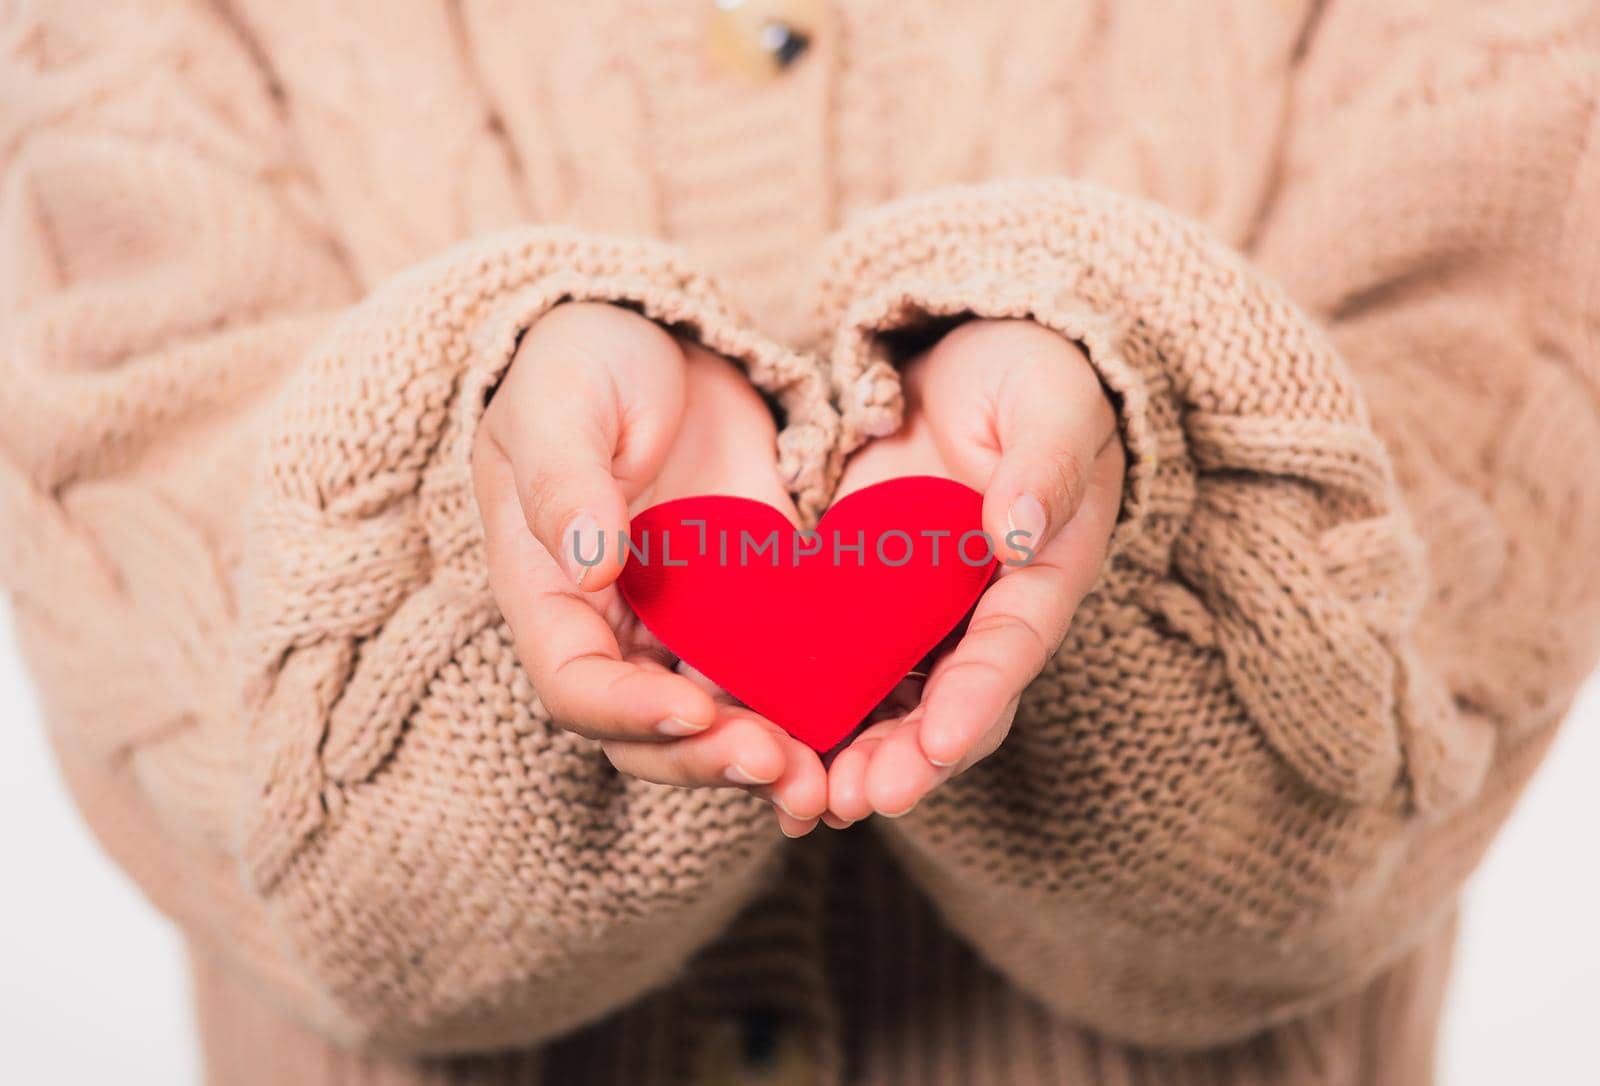 Love Valentine's Day. Female beauty hands holding modern a red heart isolated on white background, giving help donation medical healthcare happy holiday background concept